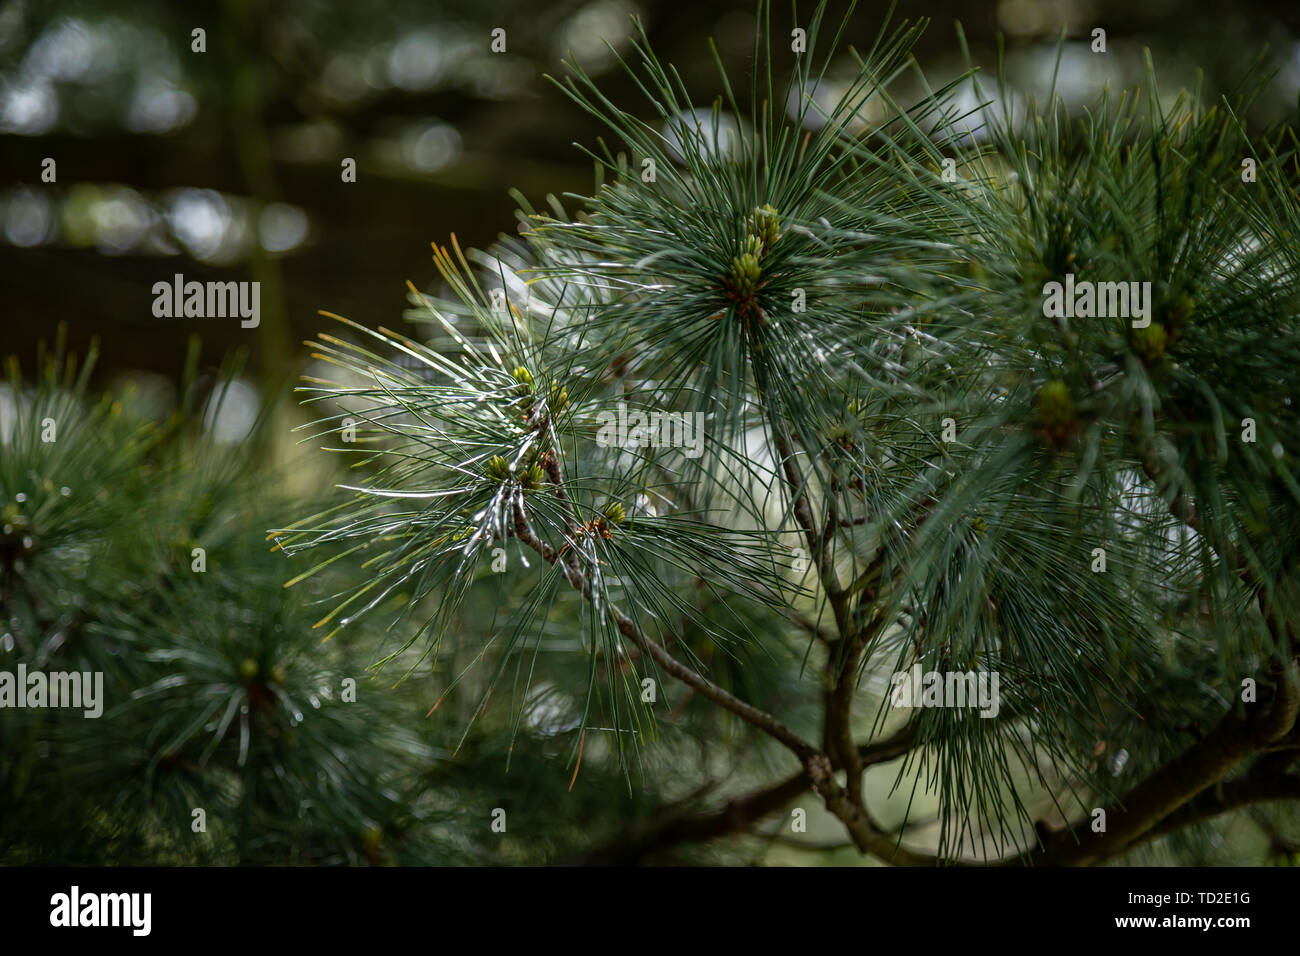 Close up of pine needles on a tree in Kew Gardens, London. Stock Photo